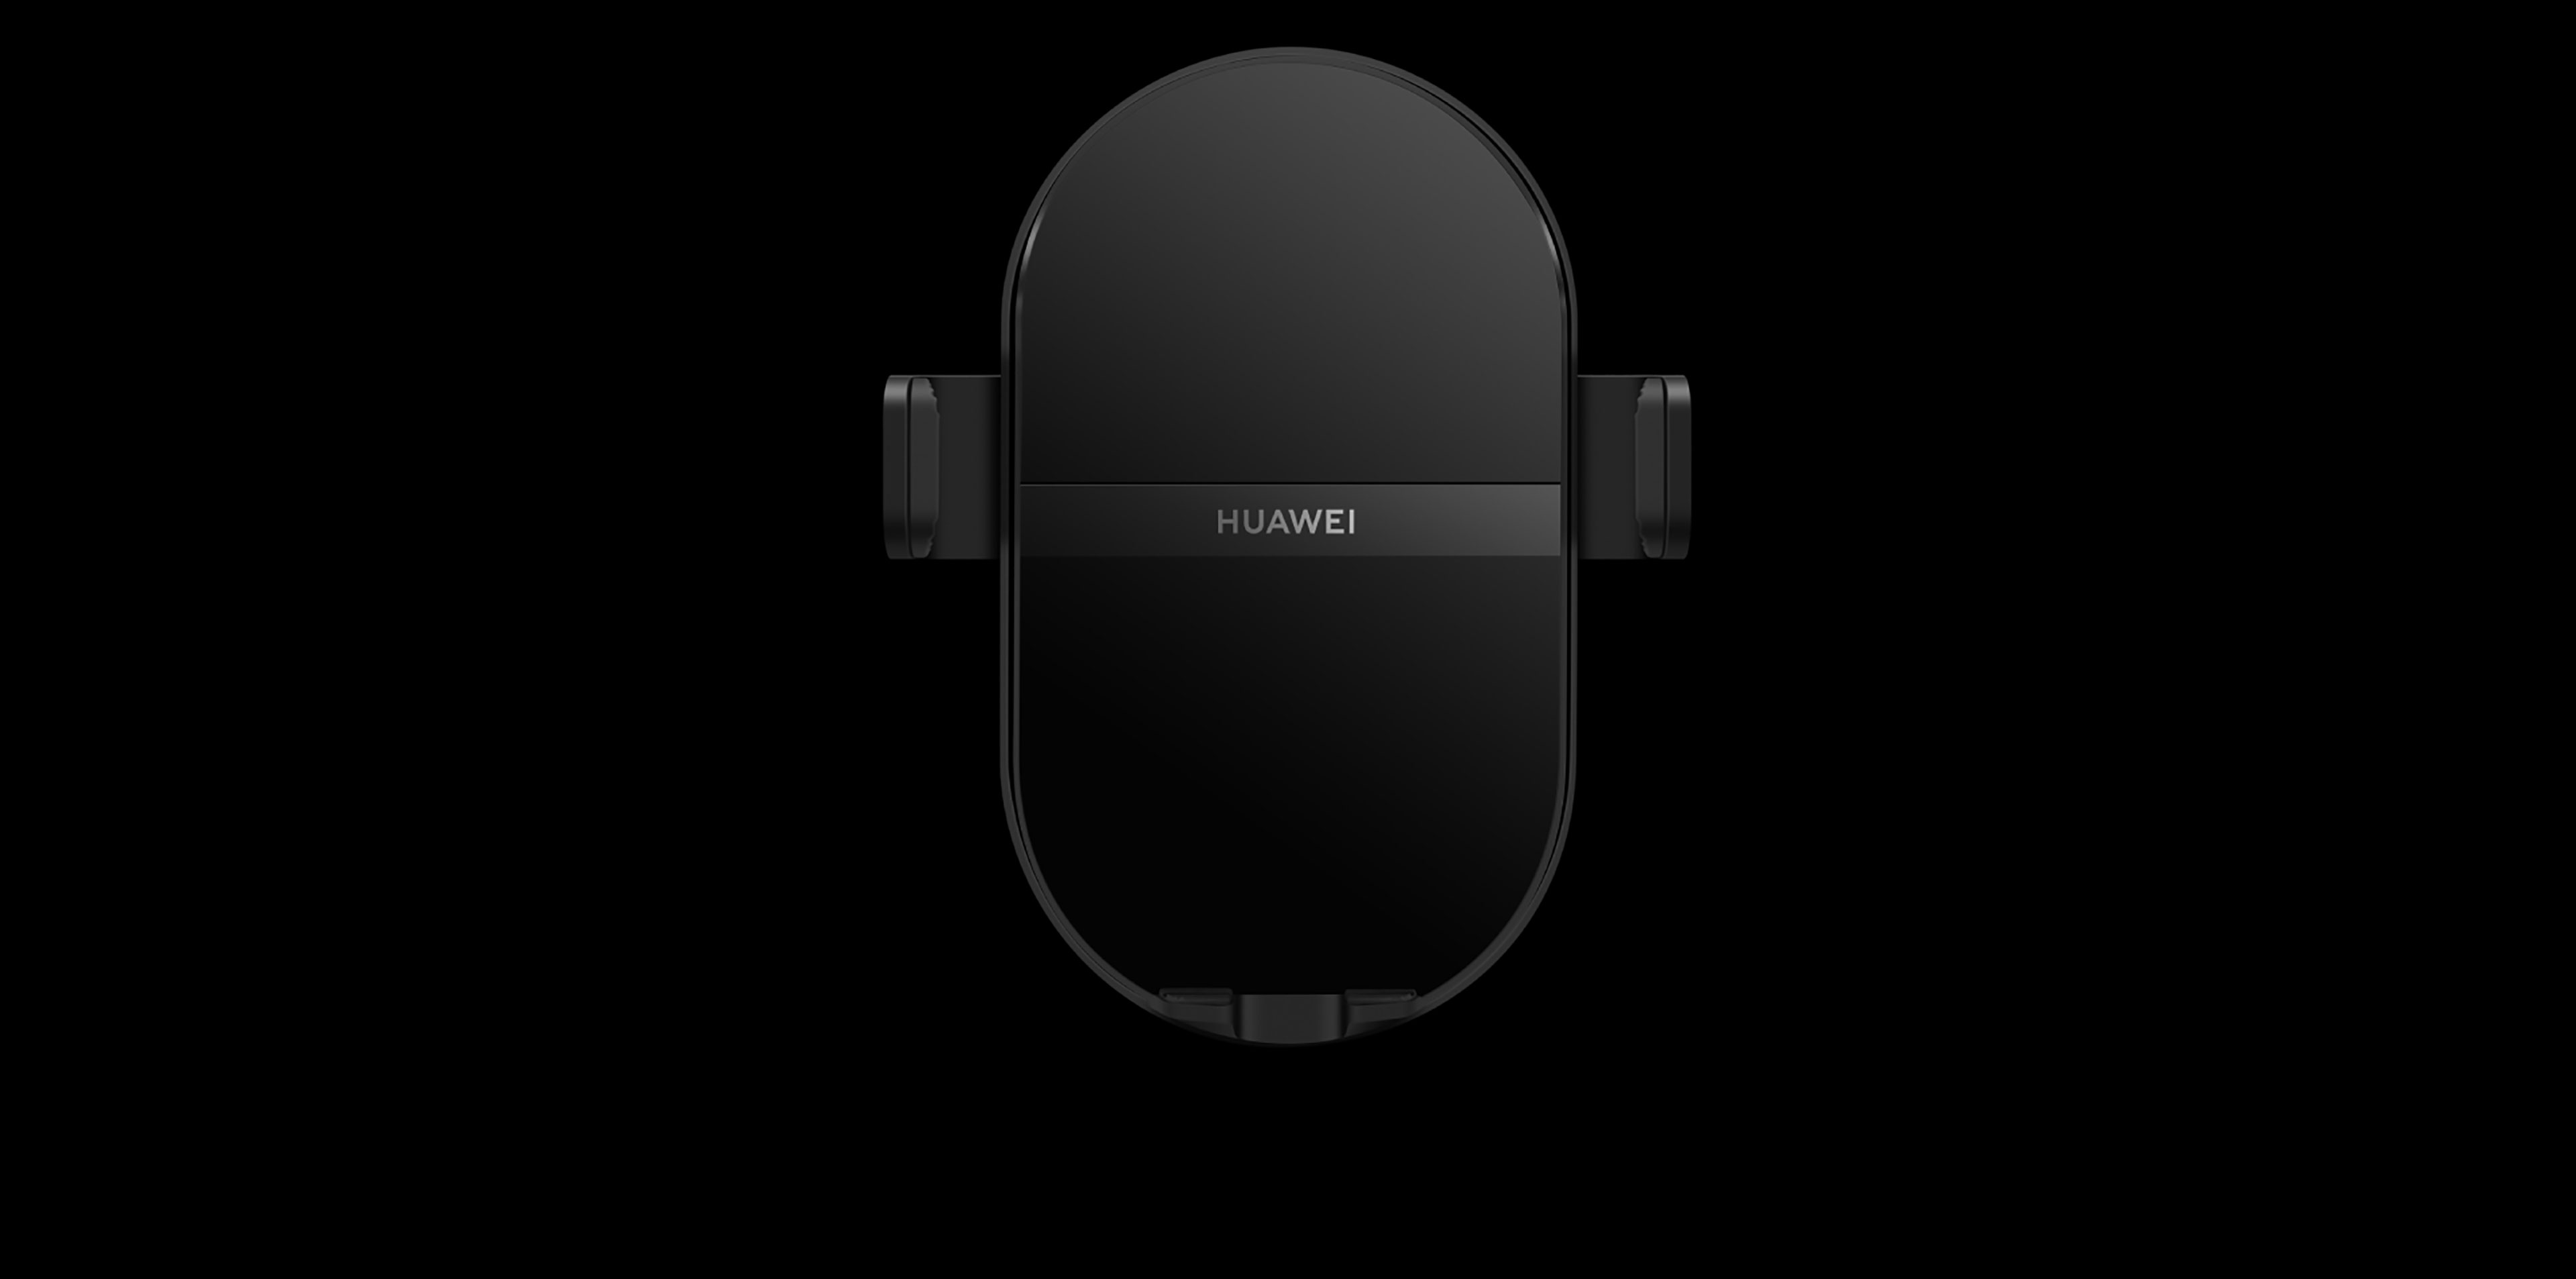 HUAWEI_50W_SuperCharge_Wireless_Car_Charger-09.jpg